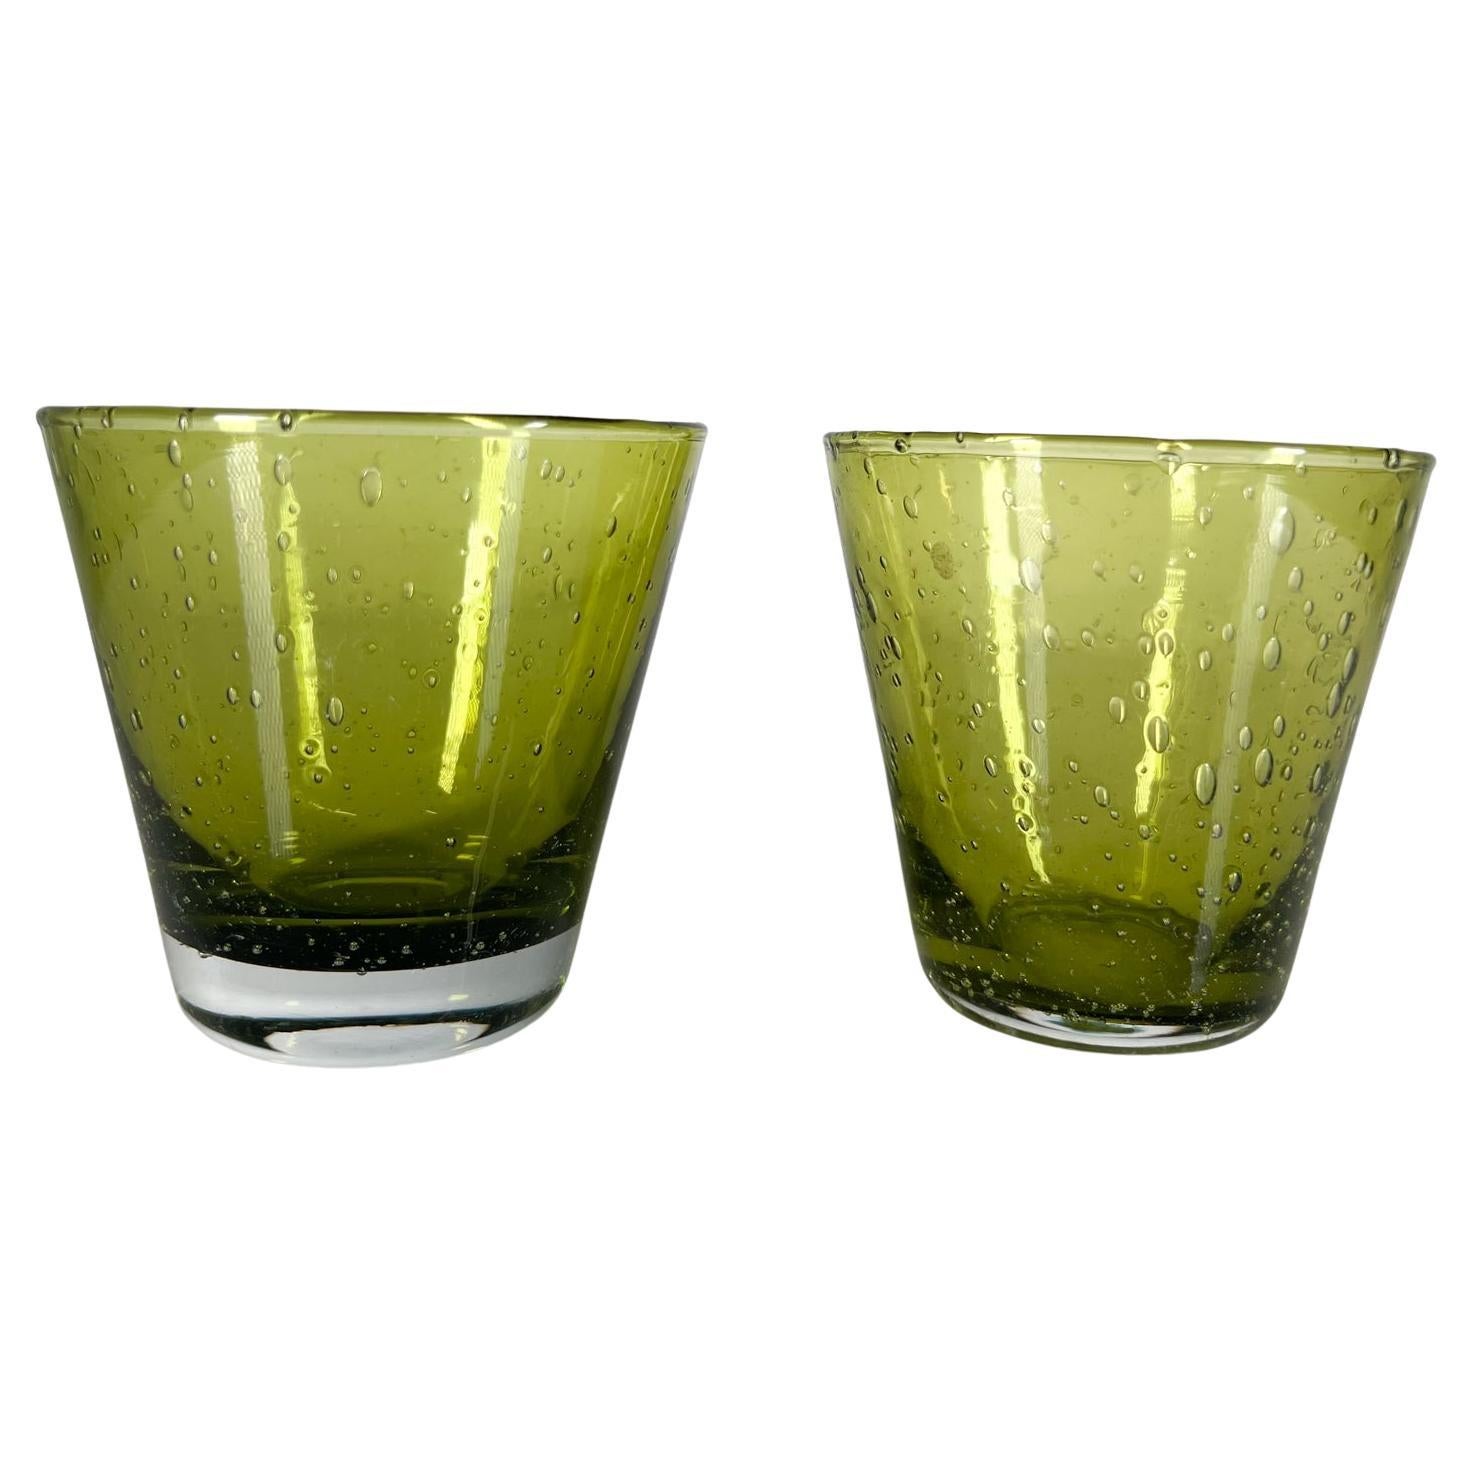 1960s Art Glass two green high ball glasses cocktail drinkware
Measures: 3.13 tall x 3.38 diameter
Preowned original unrestored vintage condition.
See all images provided.
 